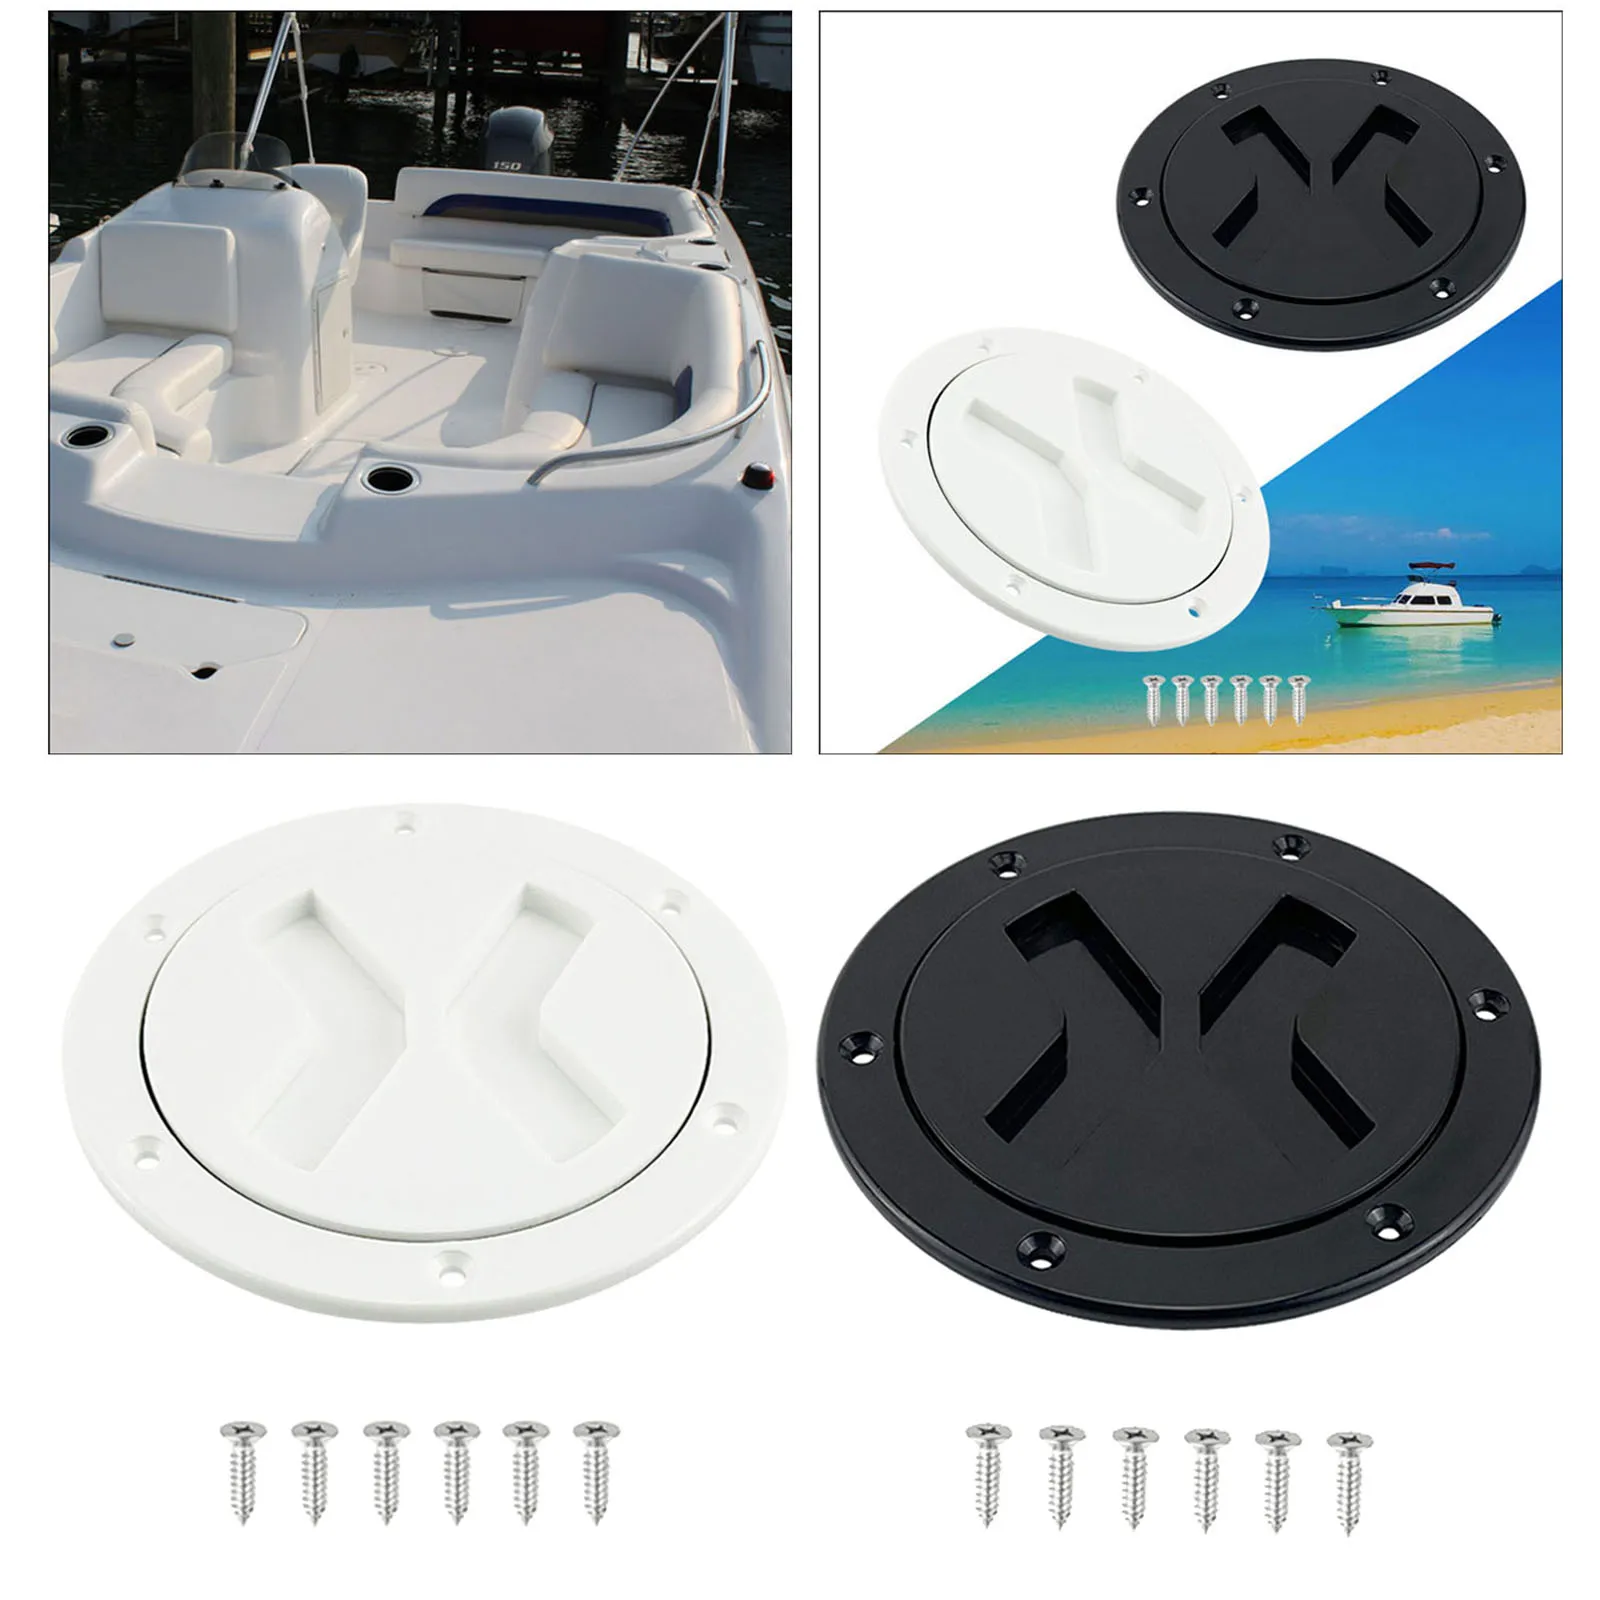 Boat 4 inch Access Port Hatch Cover Deck Plate Anti Aging Twist Out ABS Plastic Water Tight Lid for Marine